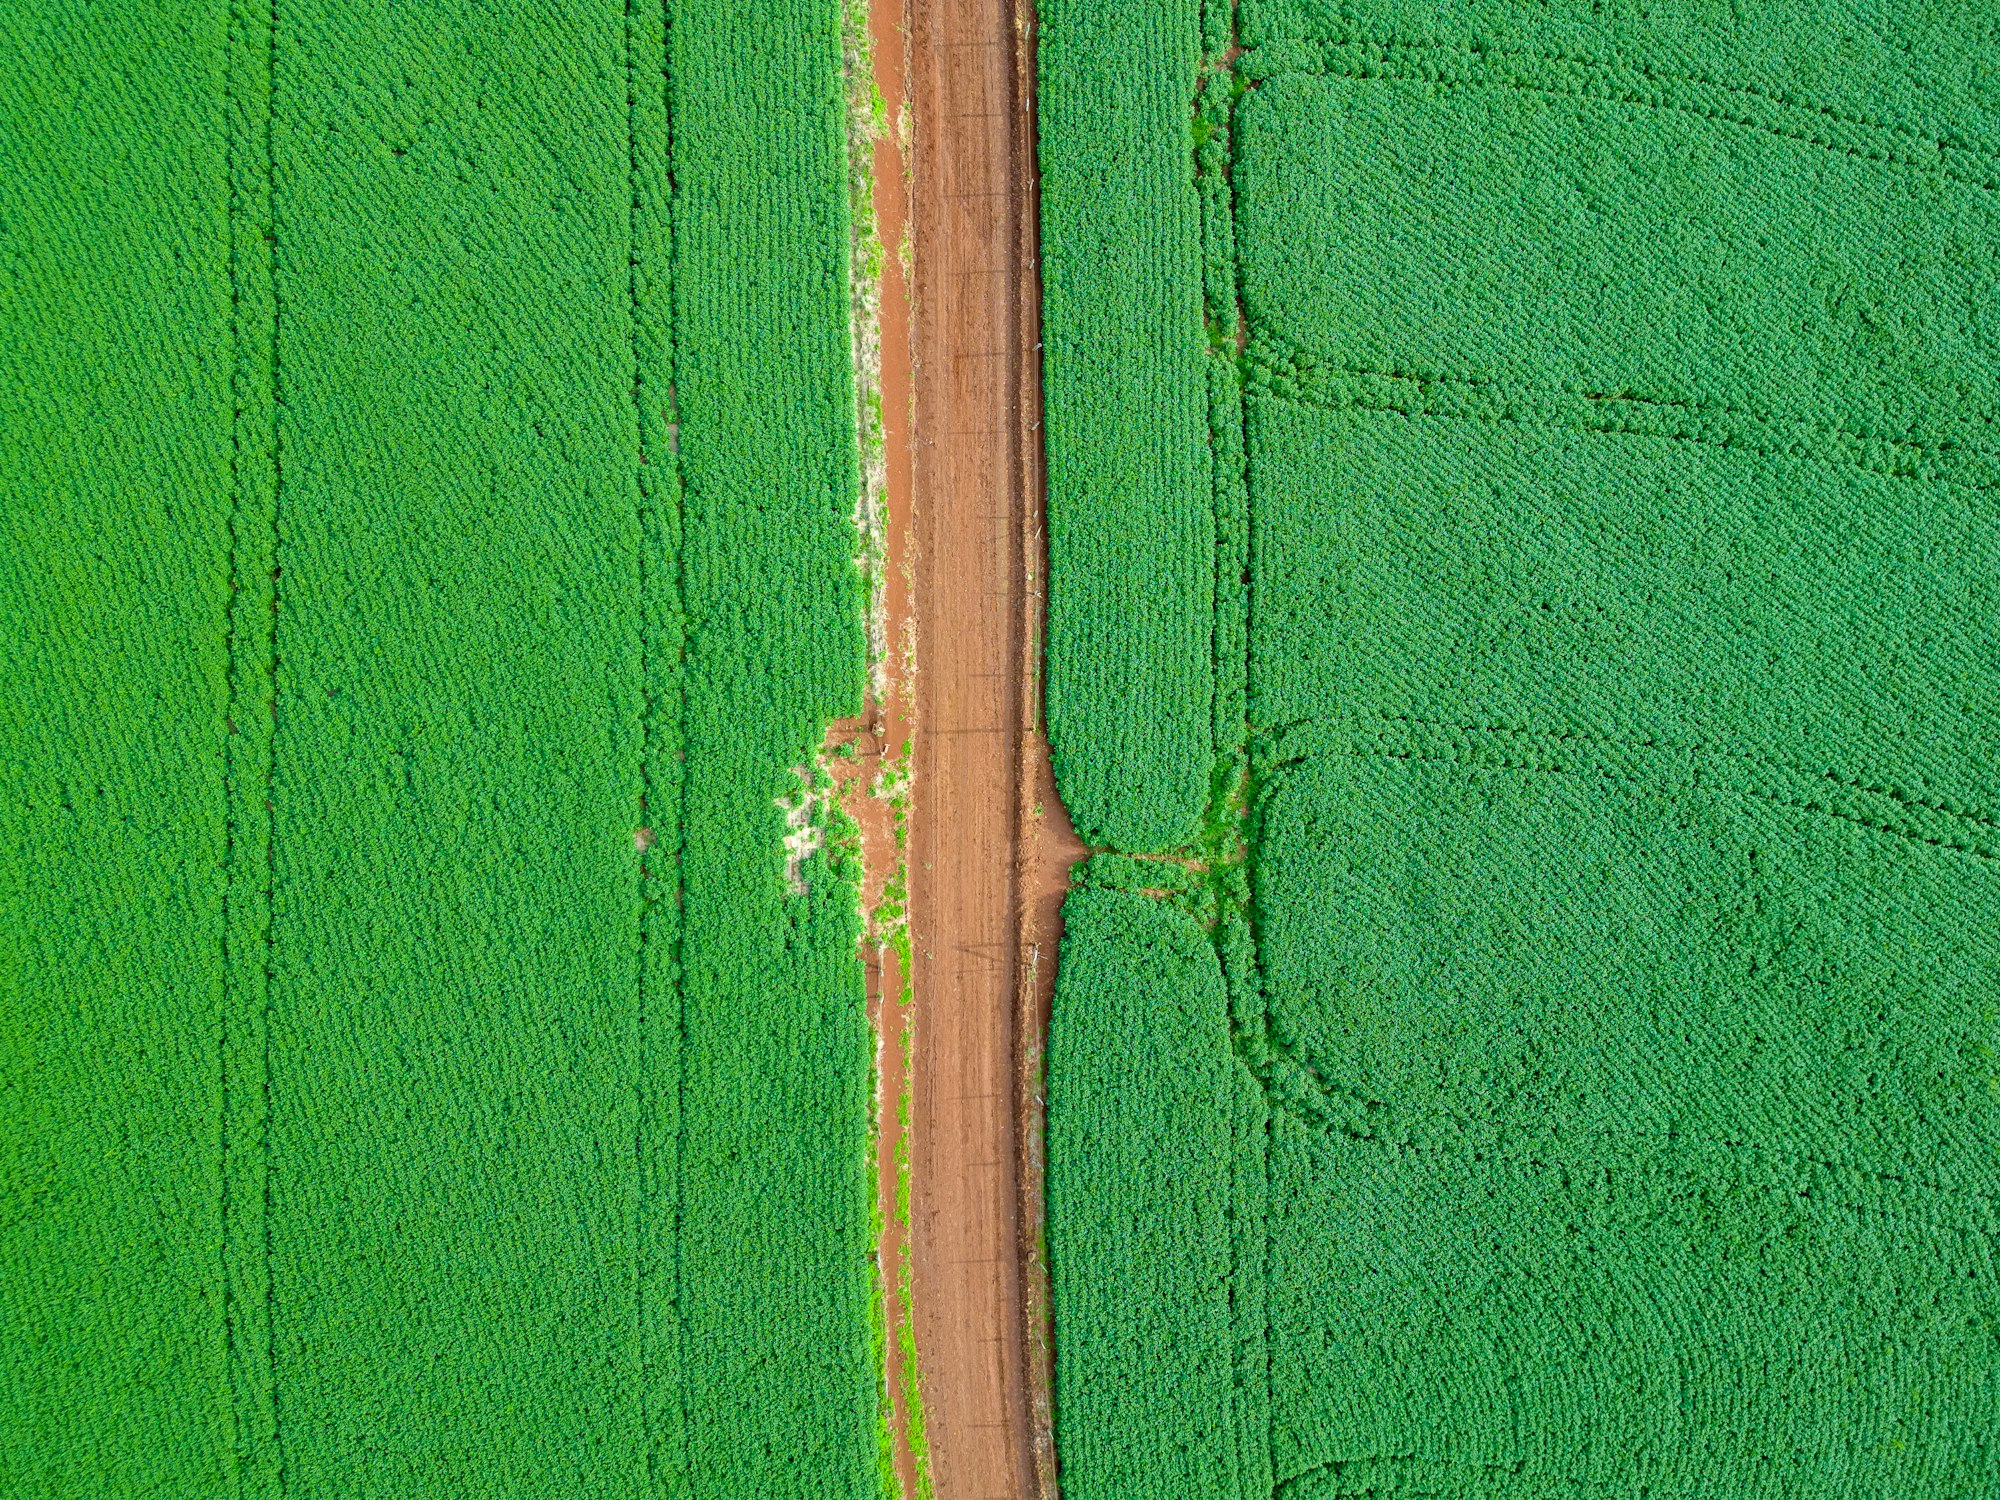 an aerial view of a dirt road in a green field